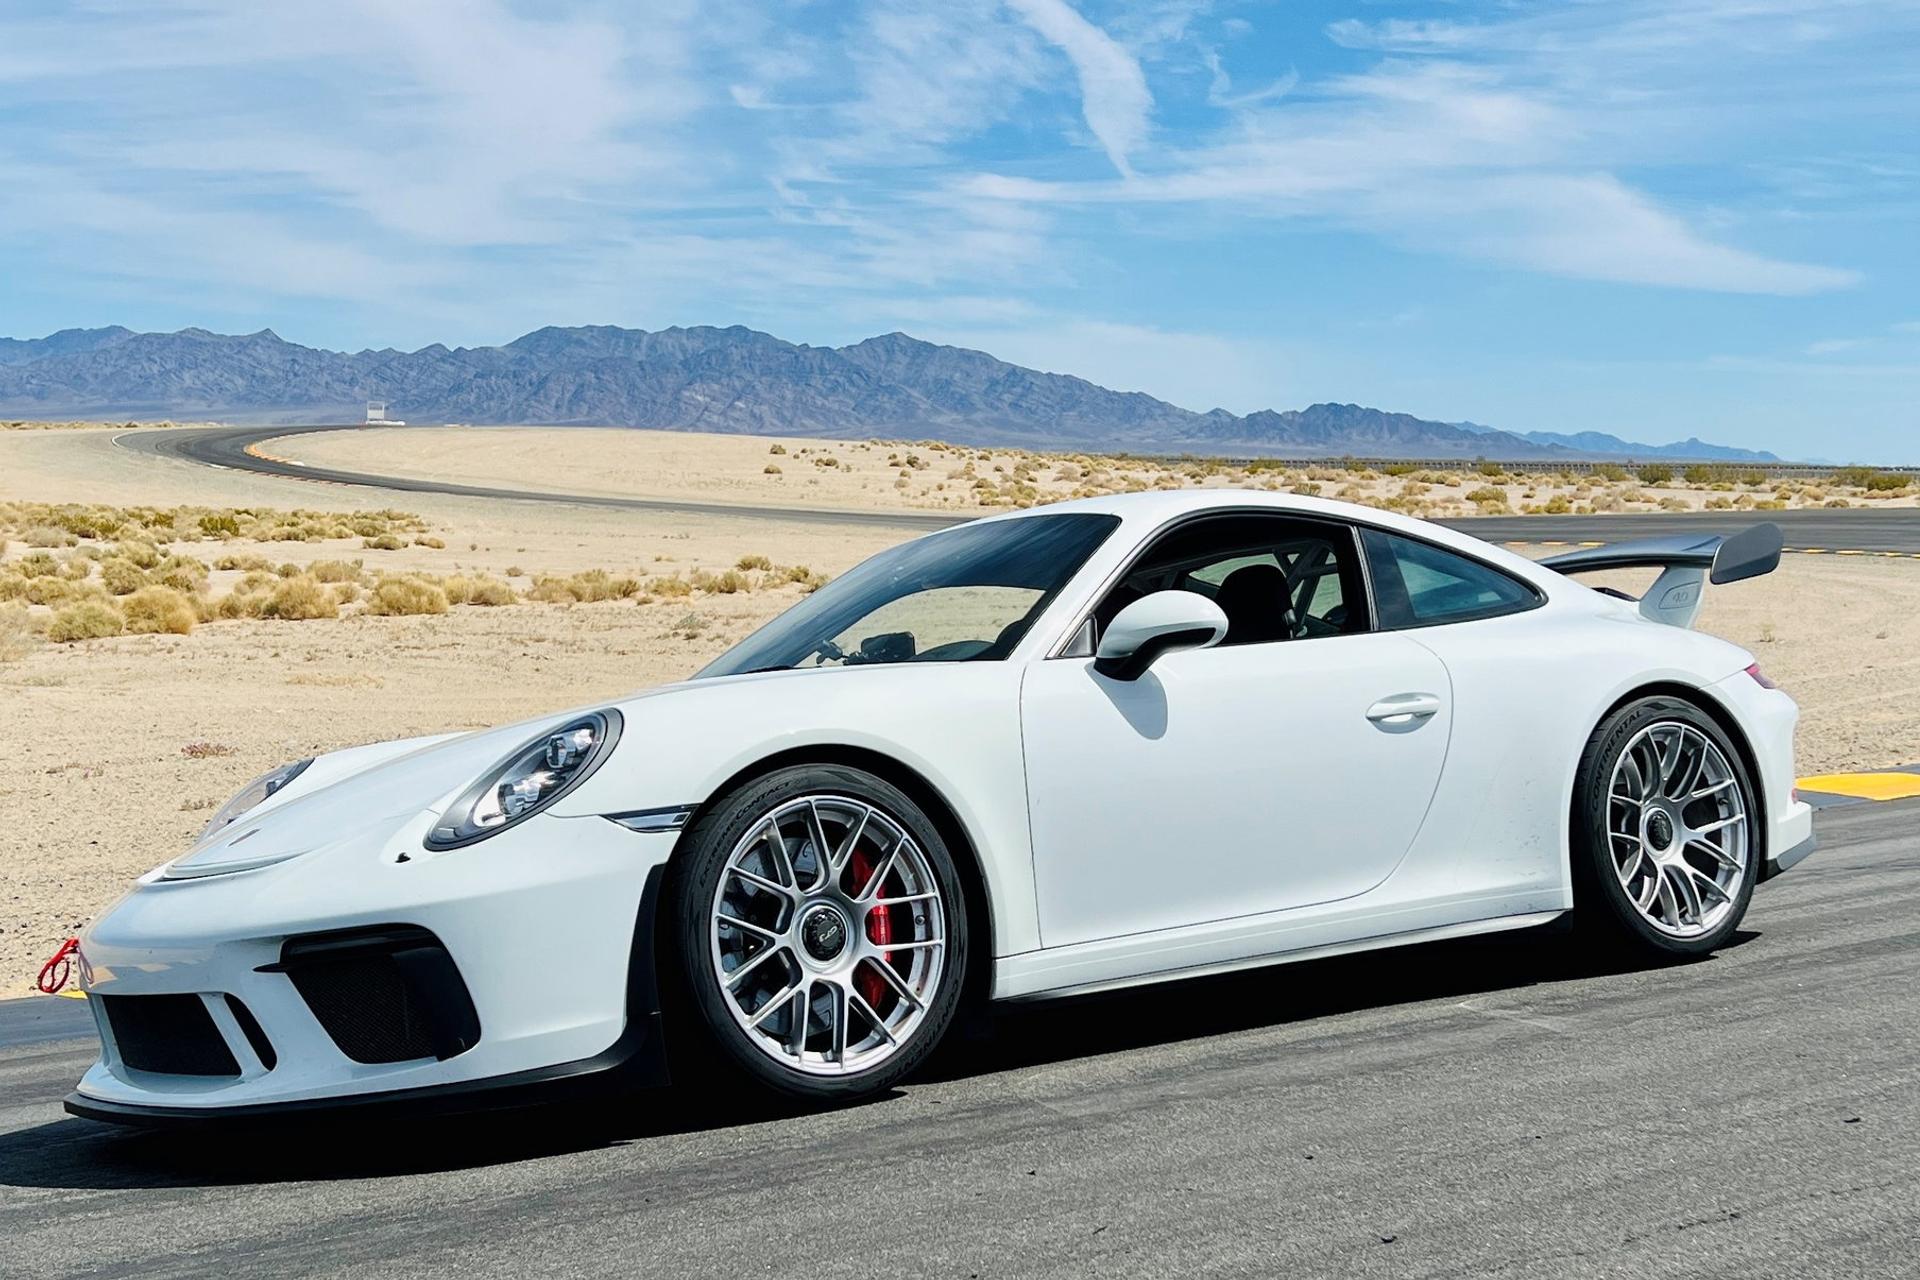 Porsche 911 991.2 GT3 with 19" EC-7RS in Race Silver